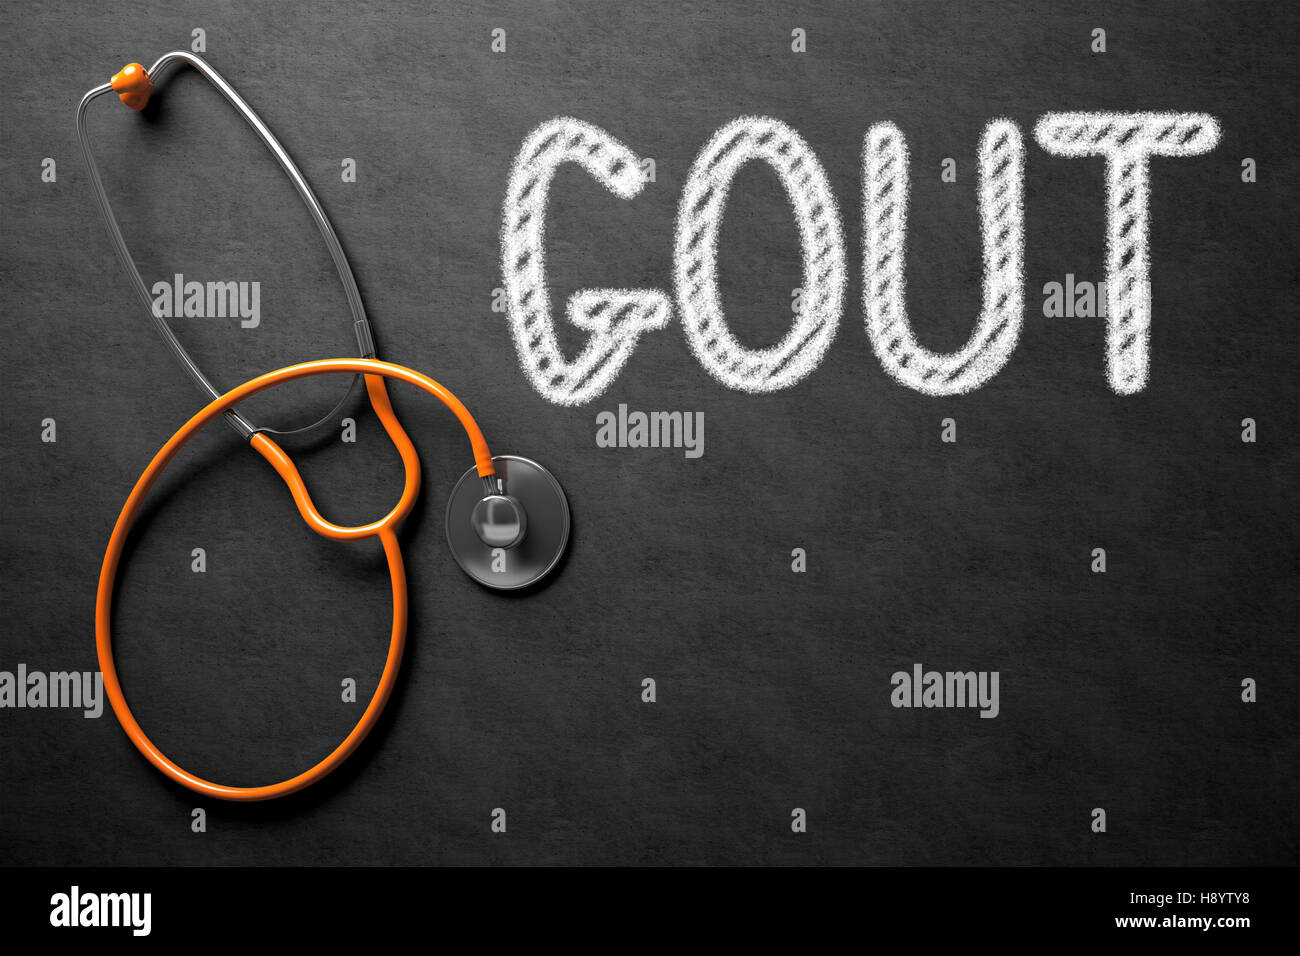 Gout - Text on Chalkboard. 3D Illustration. Stock Photo